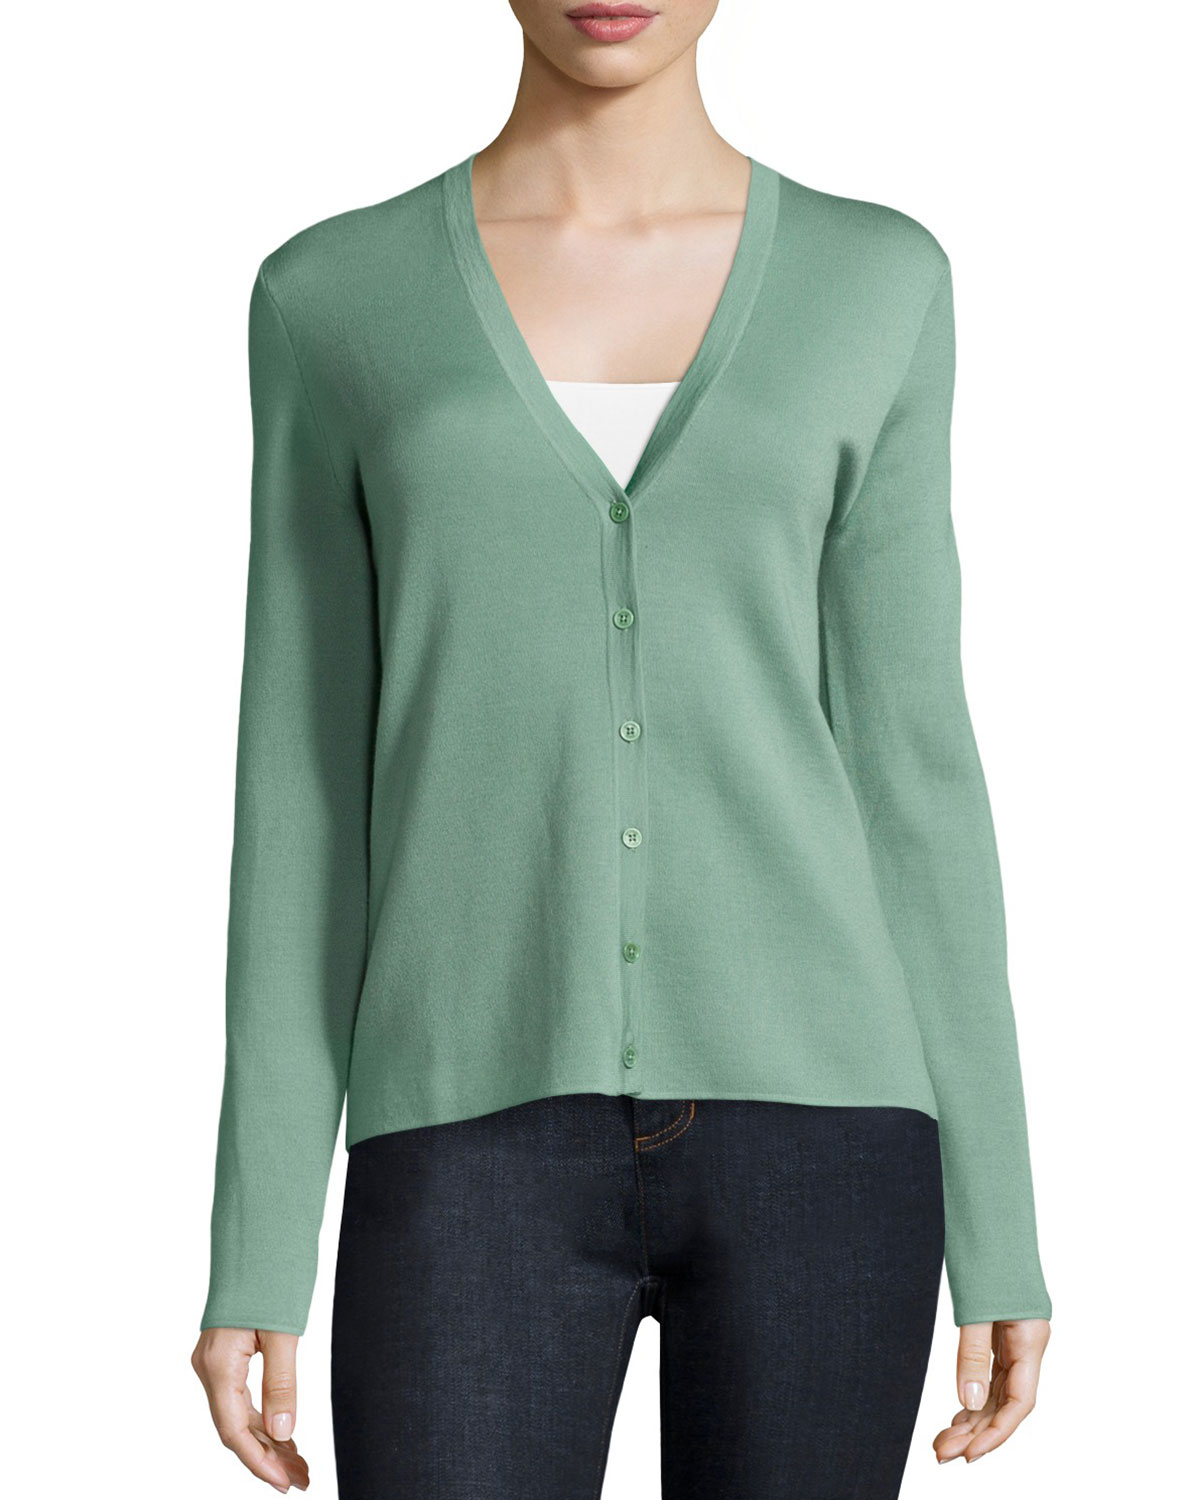 Lyst - Michael Kors Super-cashmere Button-front Cardigan in Green